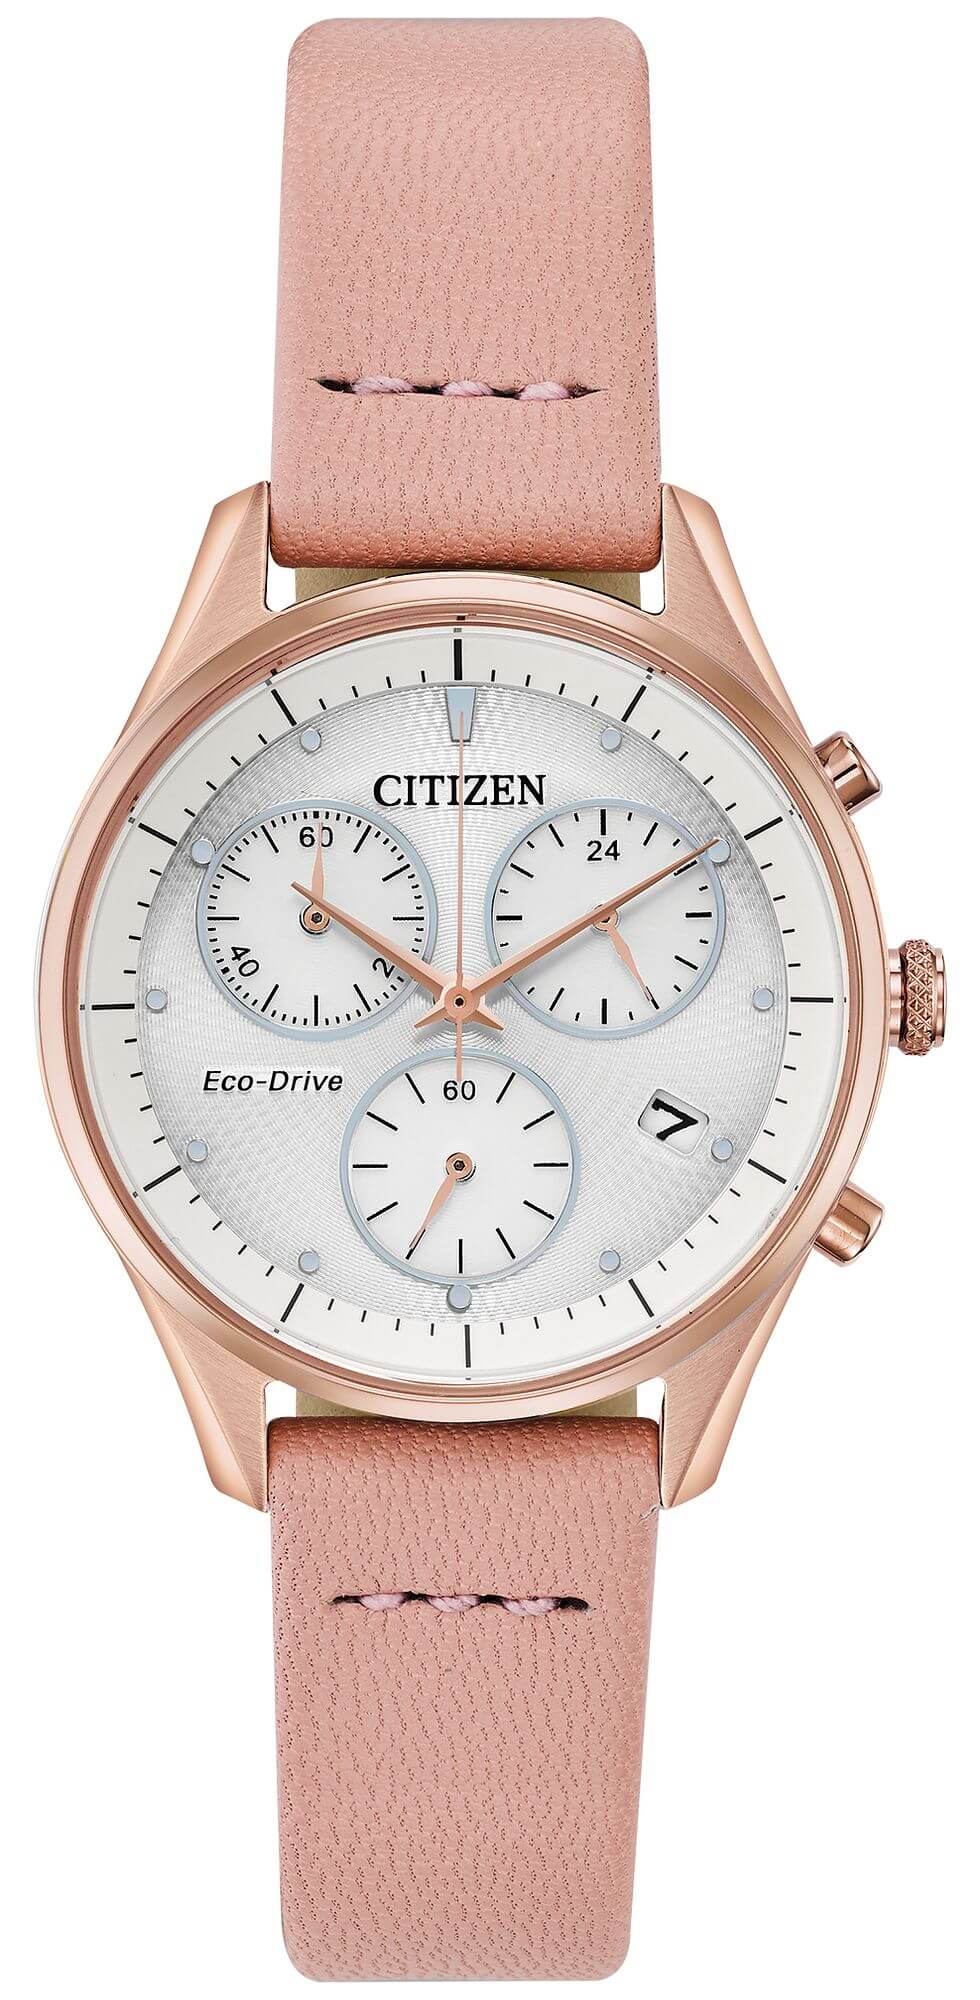 NEW Citizen Chandler FB1443-08A Ladies 32mm Chronograph Watch MSRP$295